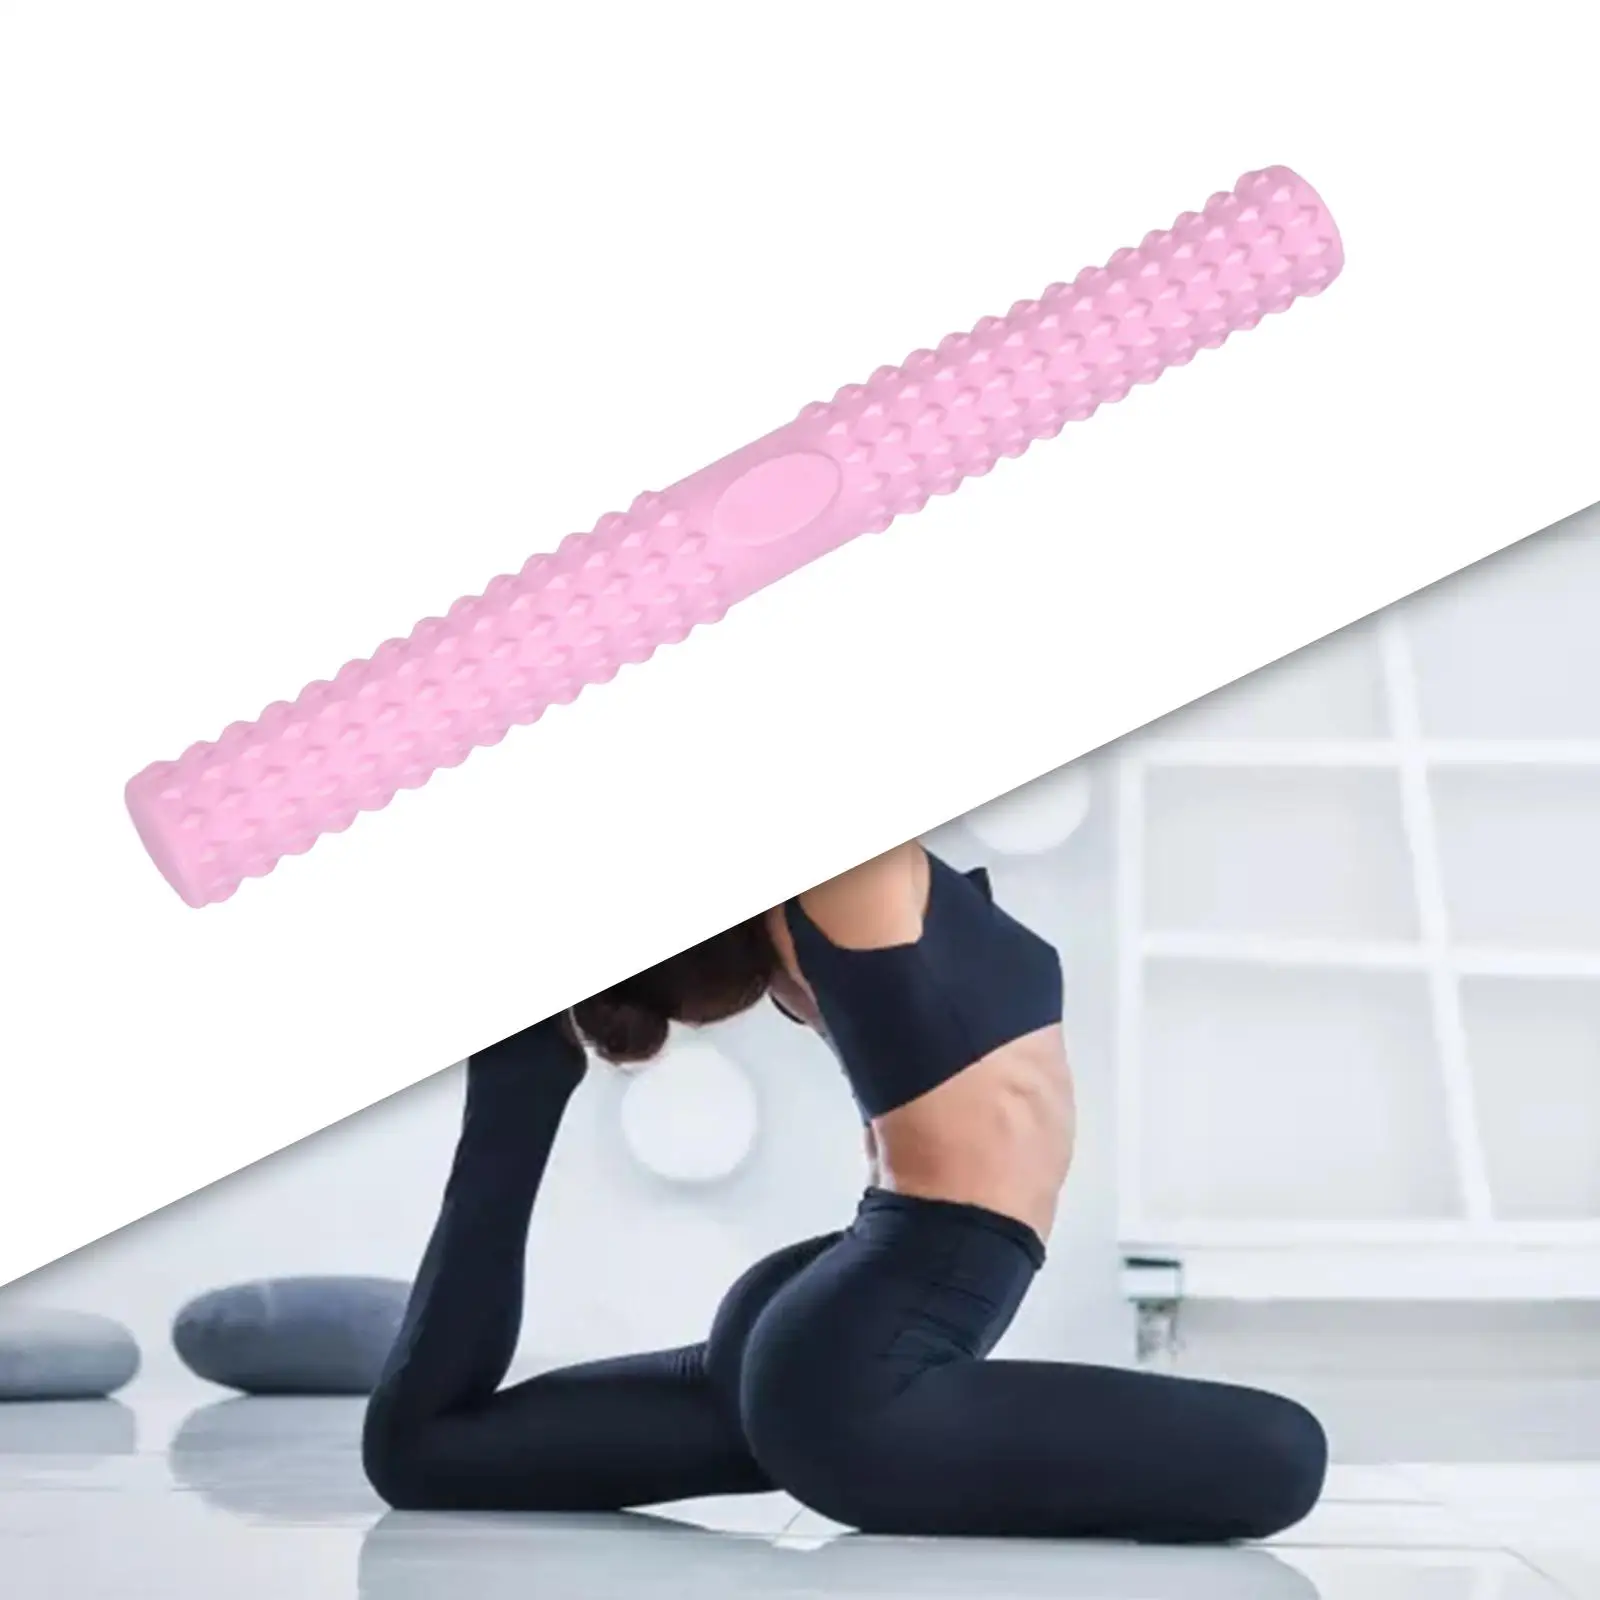 Twist Exerciser Bars Home Gym Silicone Wrist Strength Resistance Training Bar for Legs Full Body Relaxing Meridian Clap Shoulder